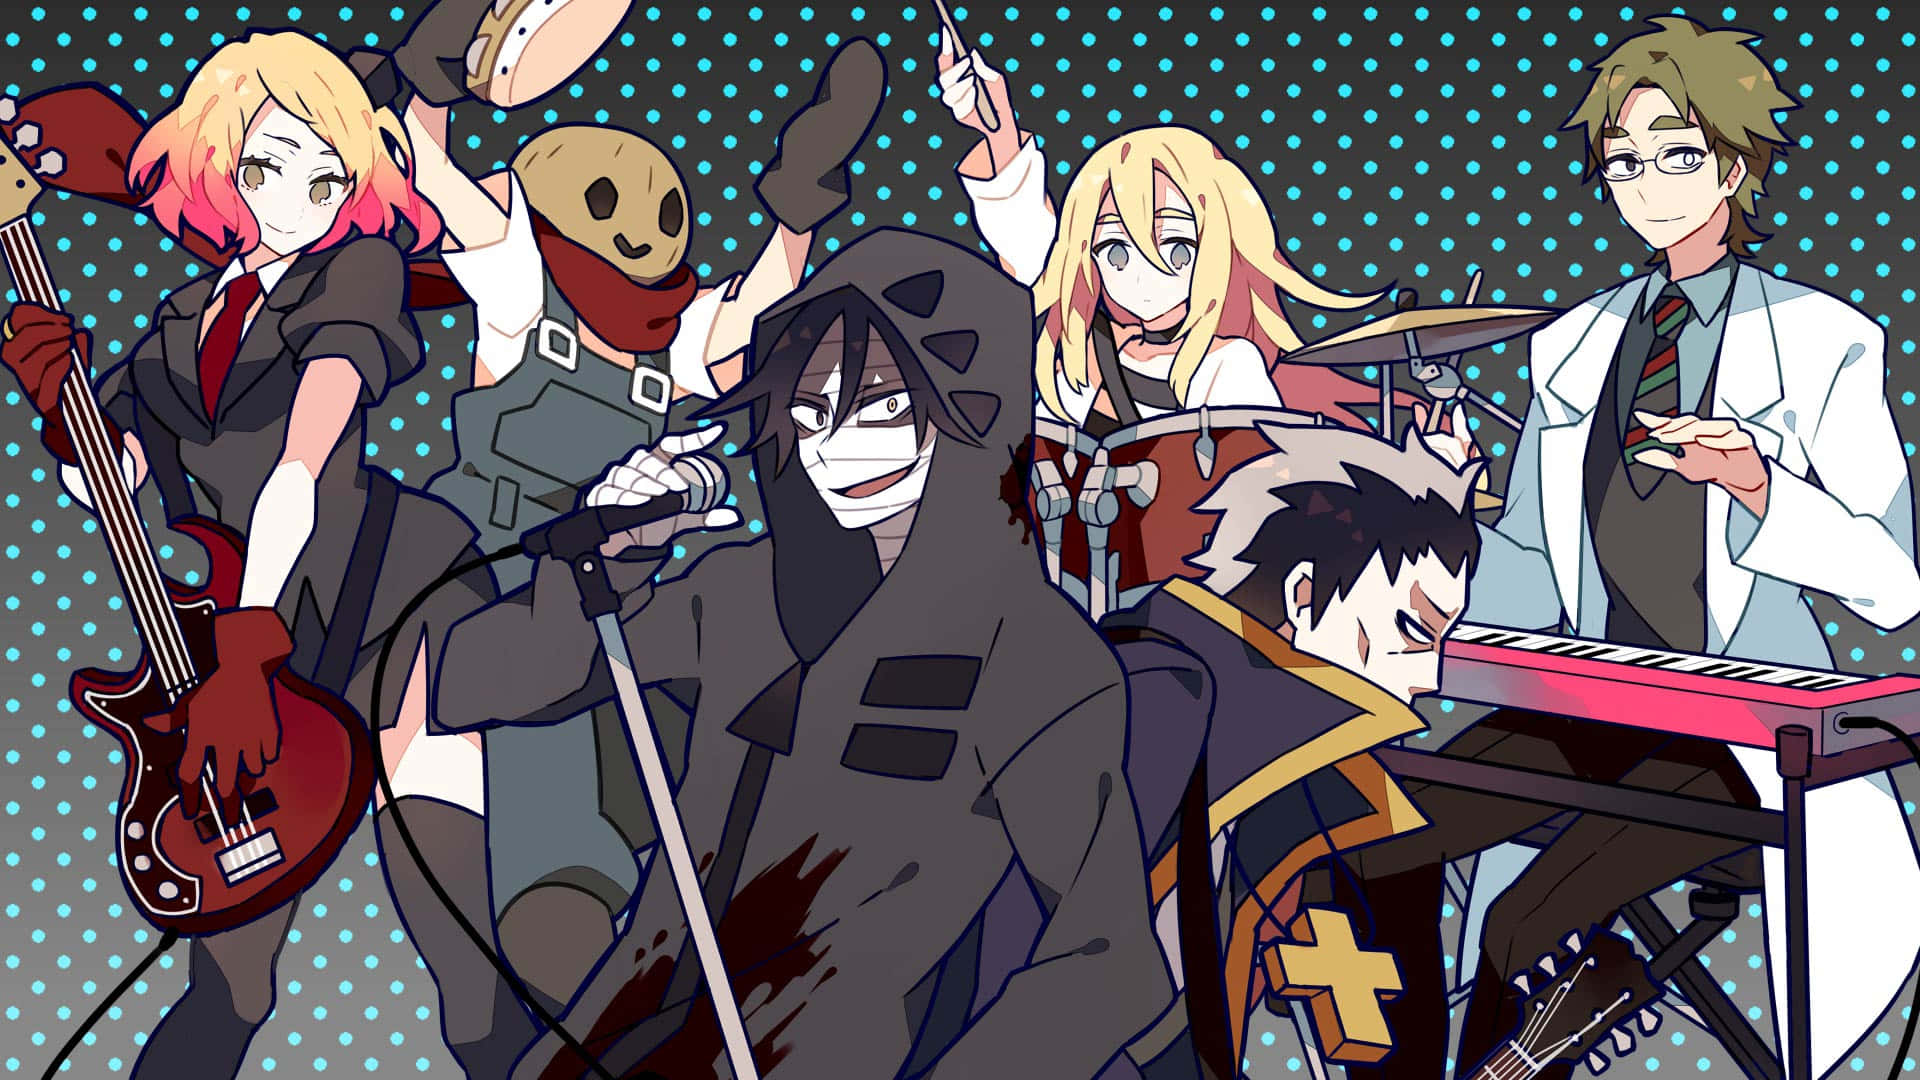 Angels of Death TV Anime Reveals Theme Song Artists